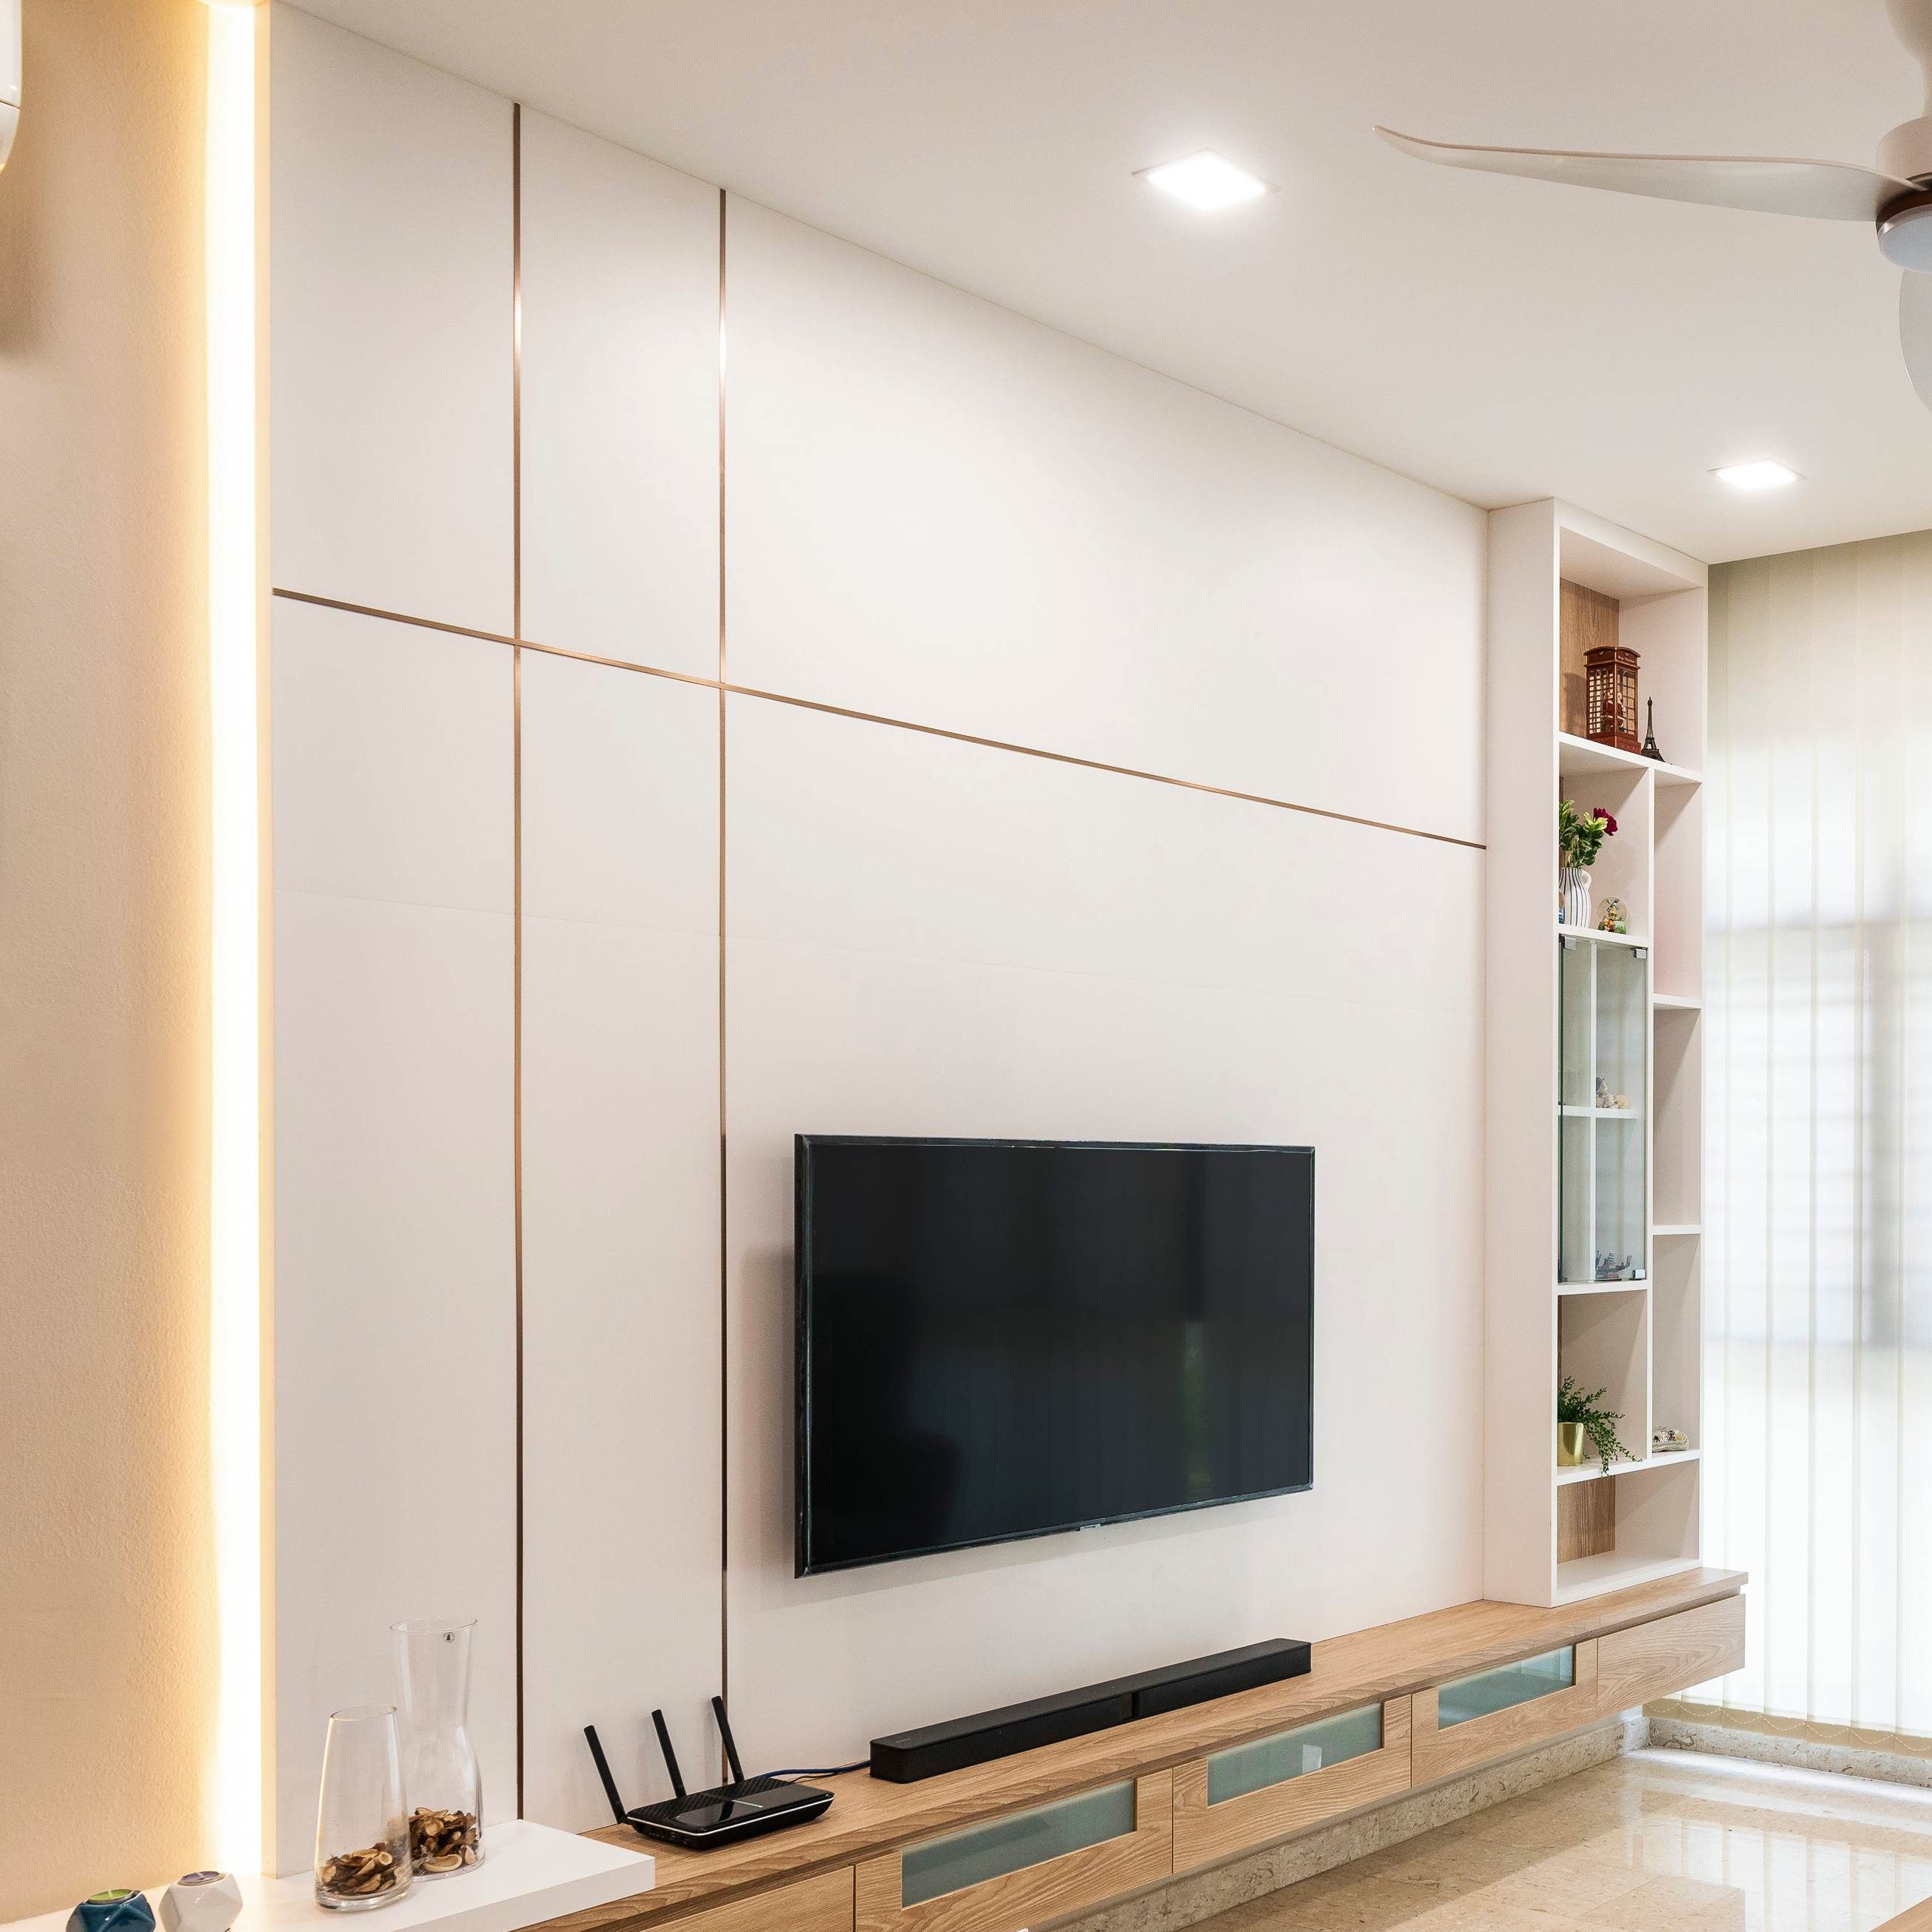 Modern White Wall Design With Panelling